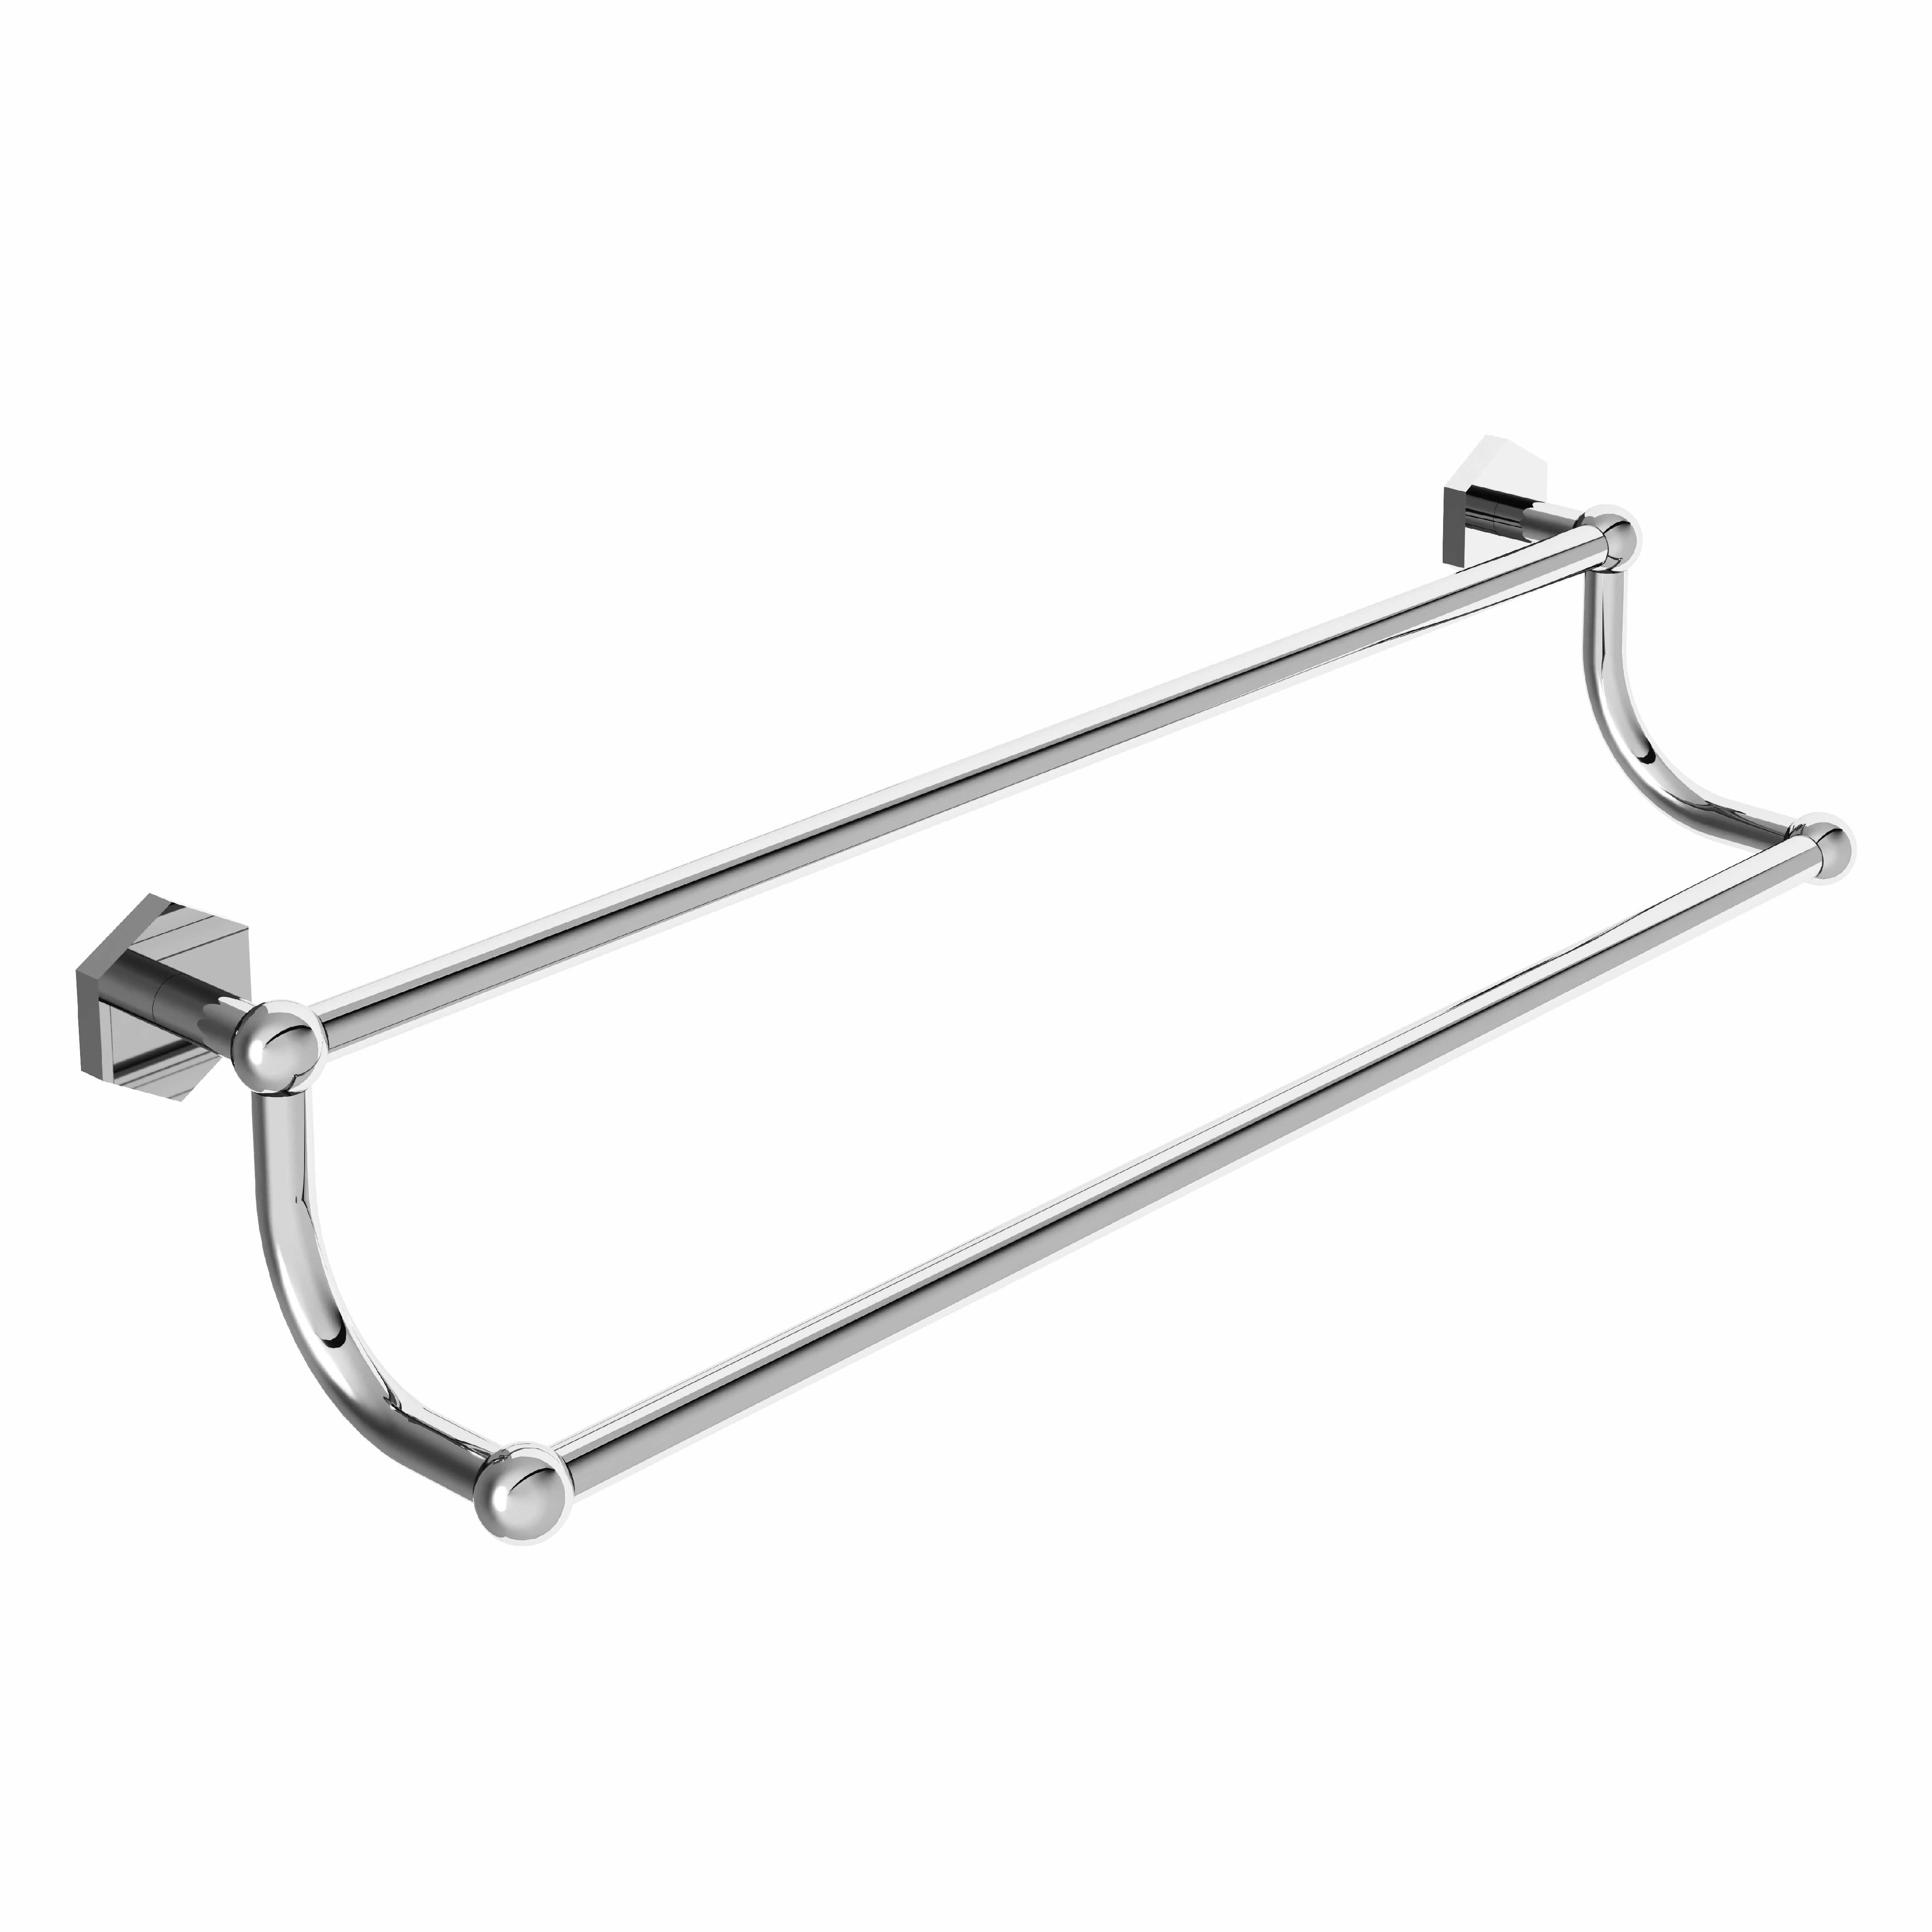 M32-509 Wall mounted double towel bar